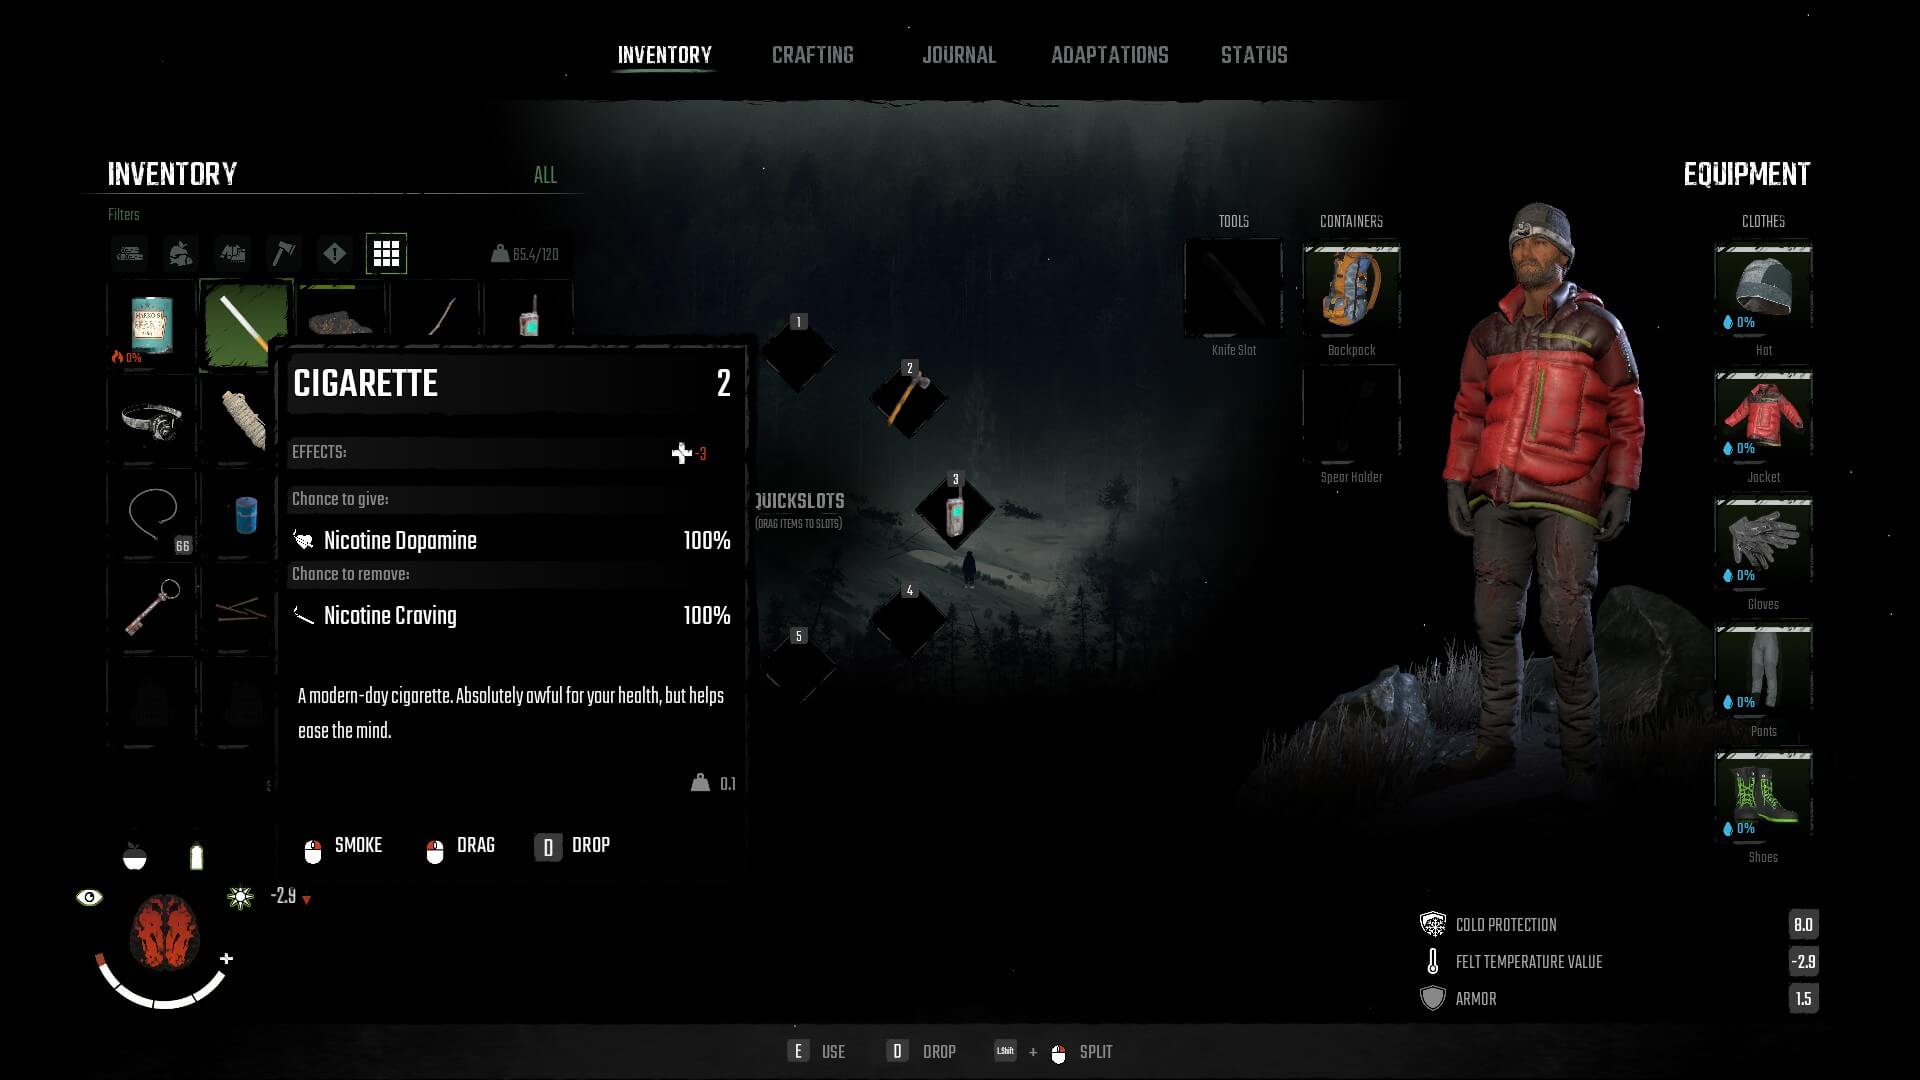 On the inventory screen, here the cigarette is highlighted and a text box displays effects. on the right is the player's character and clothing stats.